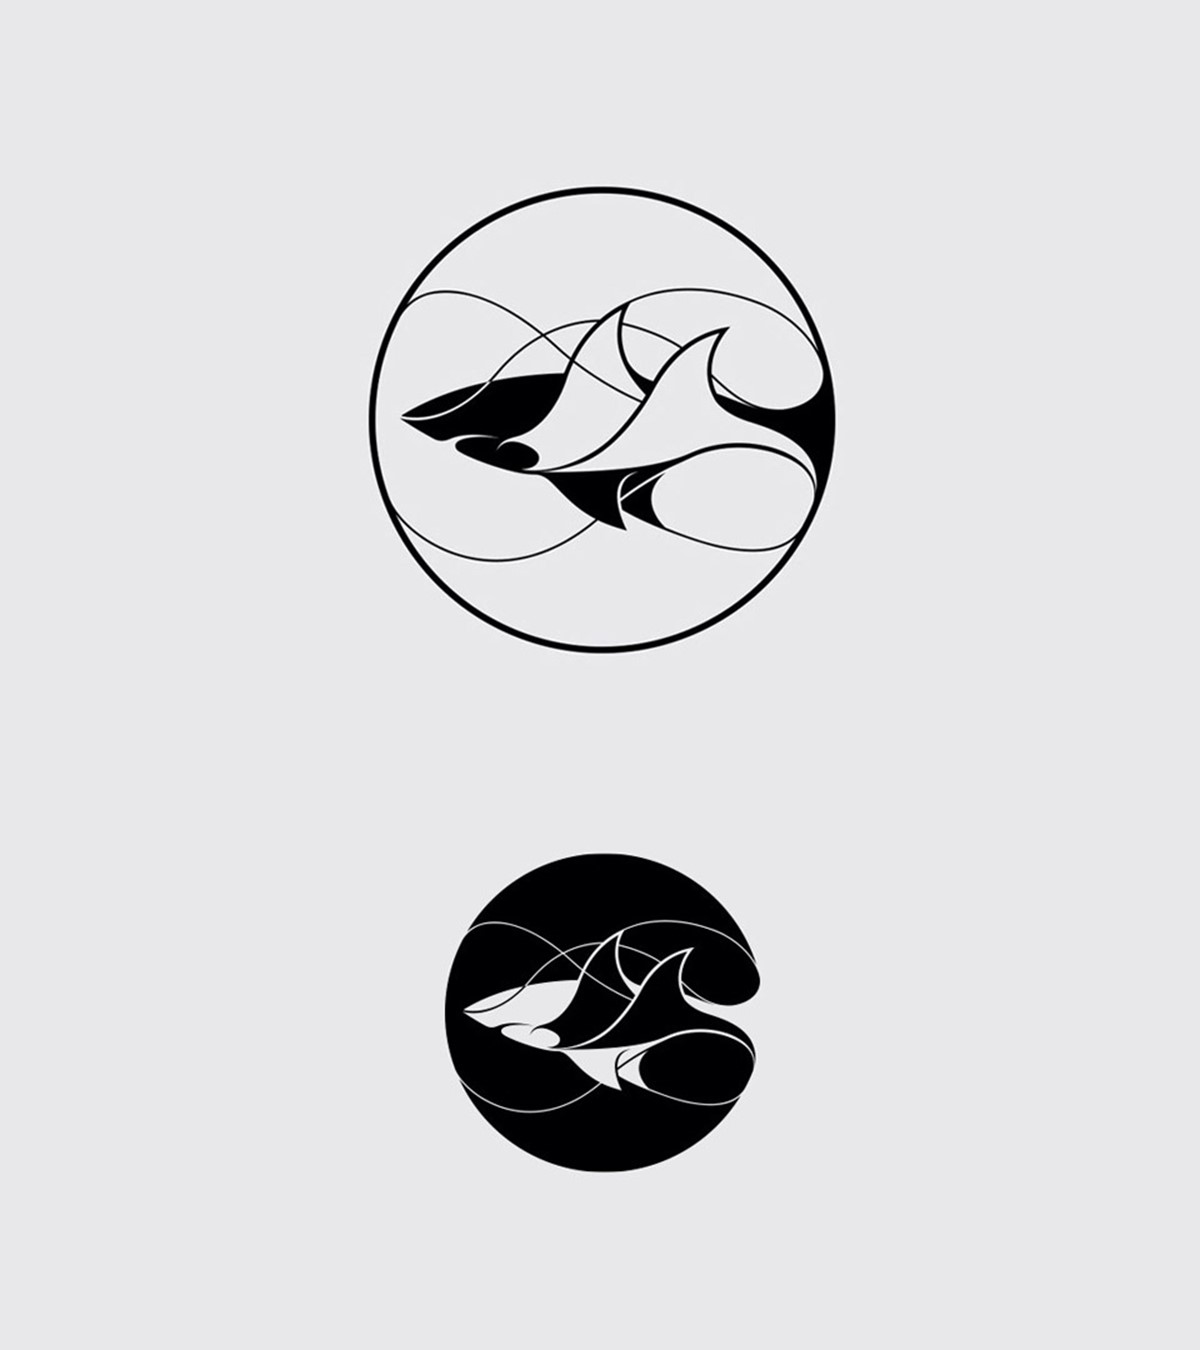 Shark Conservation Fund logo - normal and reversed. Client: DiCaprio Foundation.